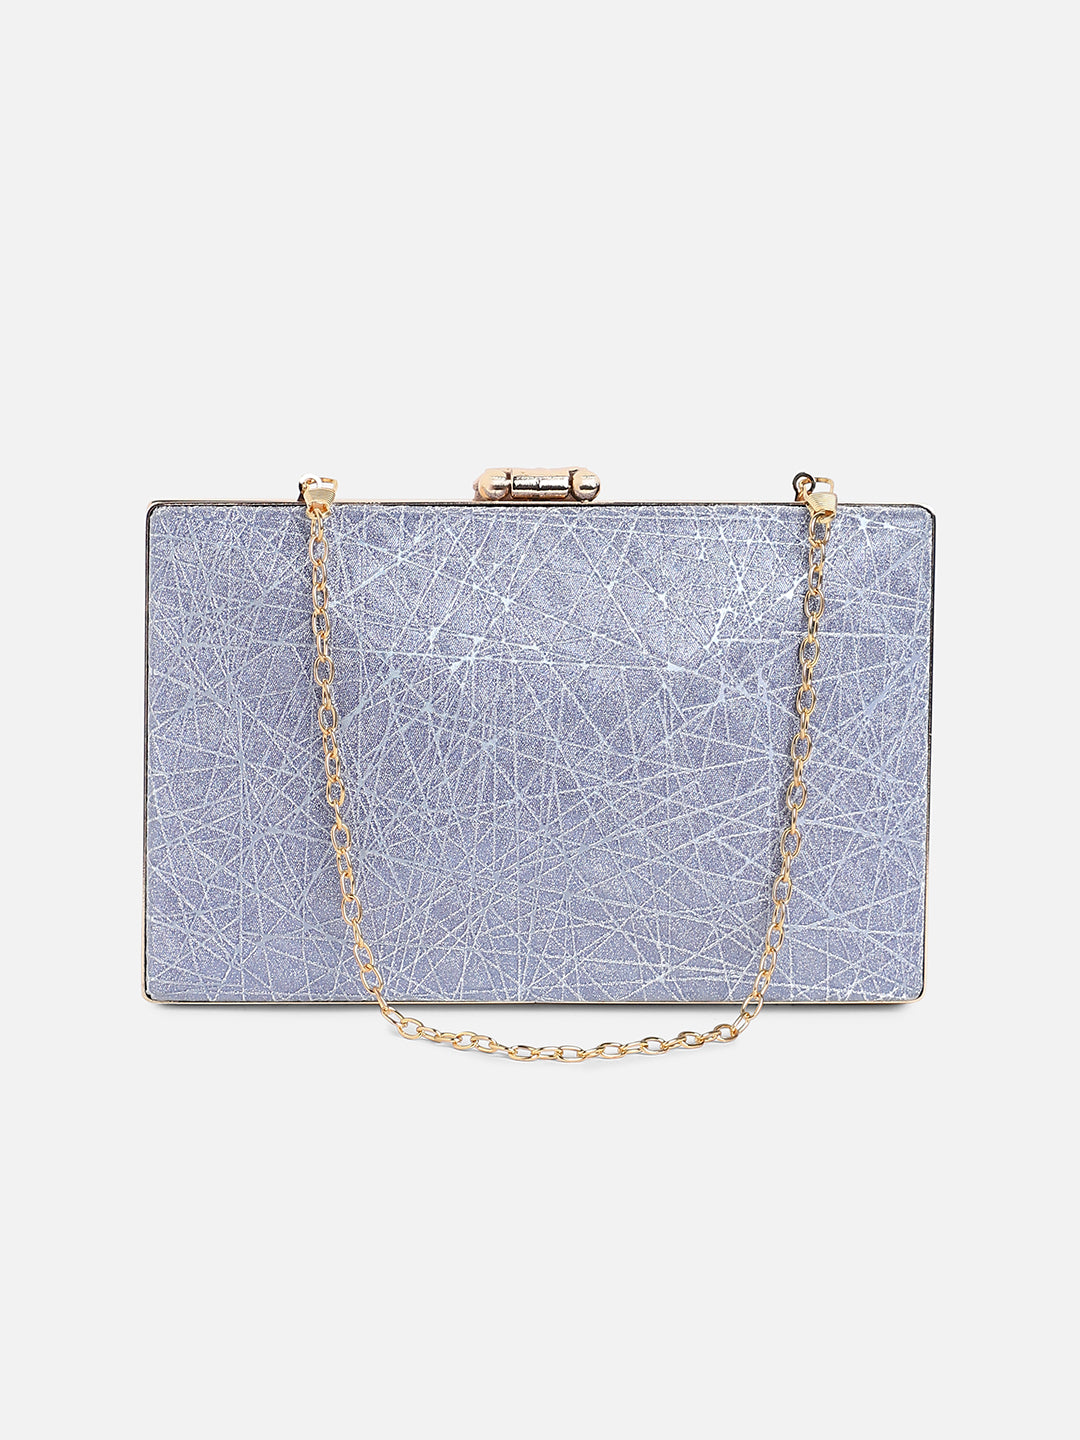 Silver Textured Vegan Leather Clutch